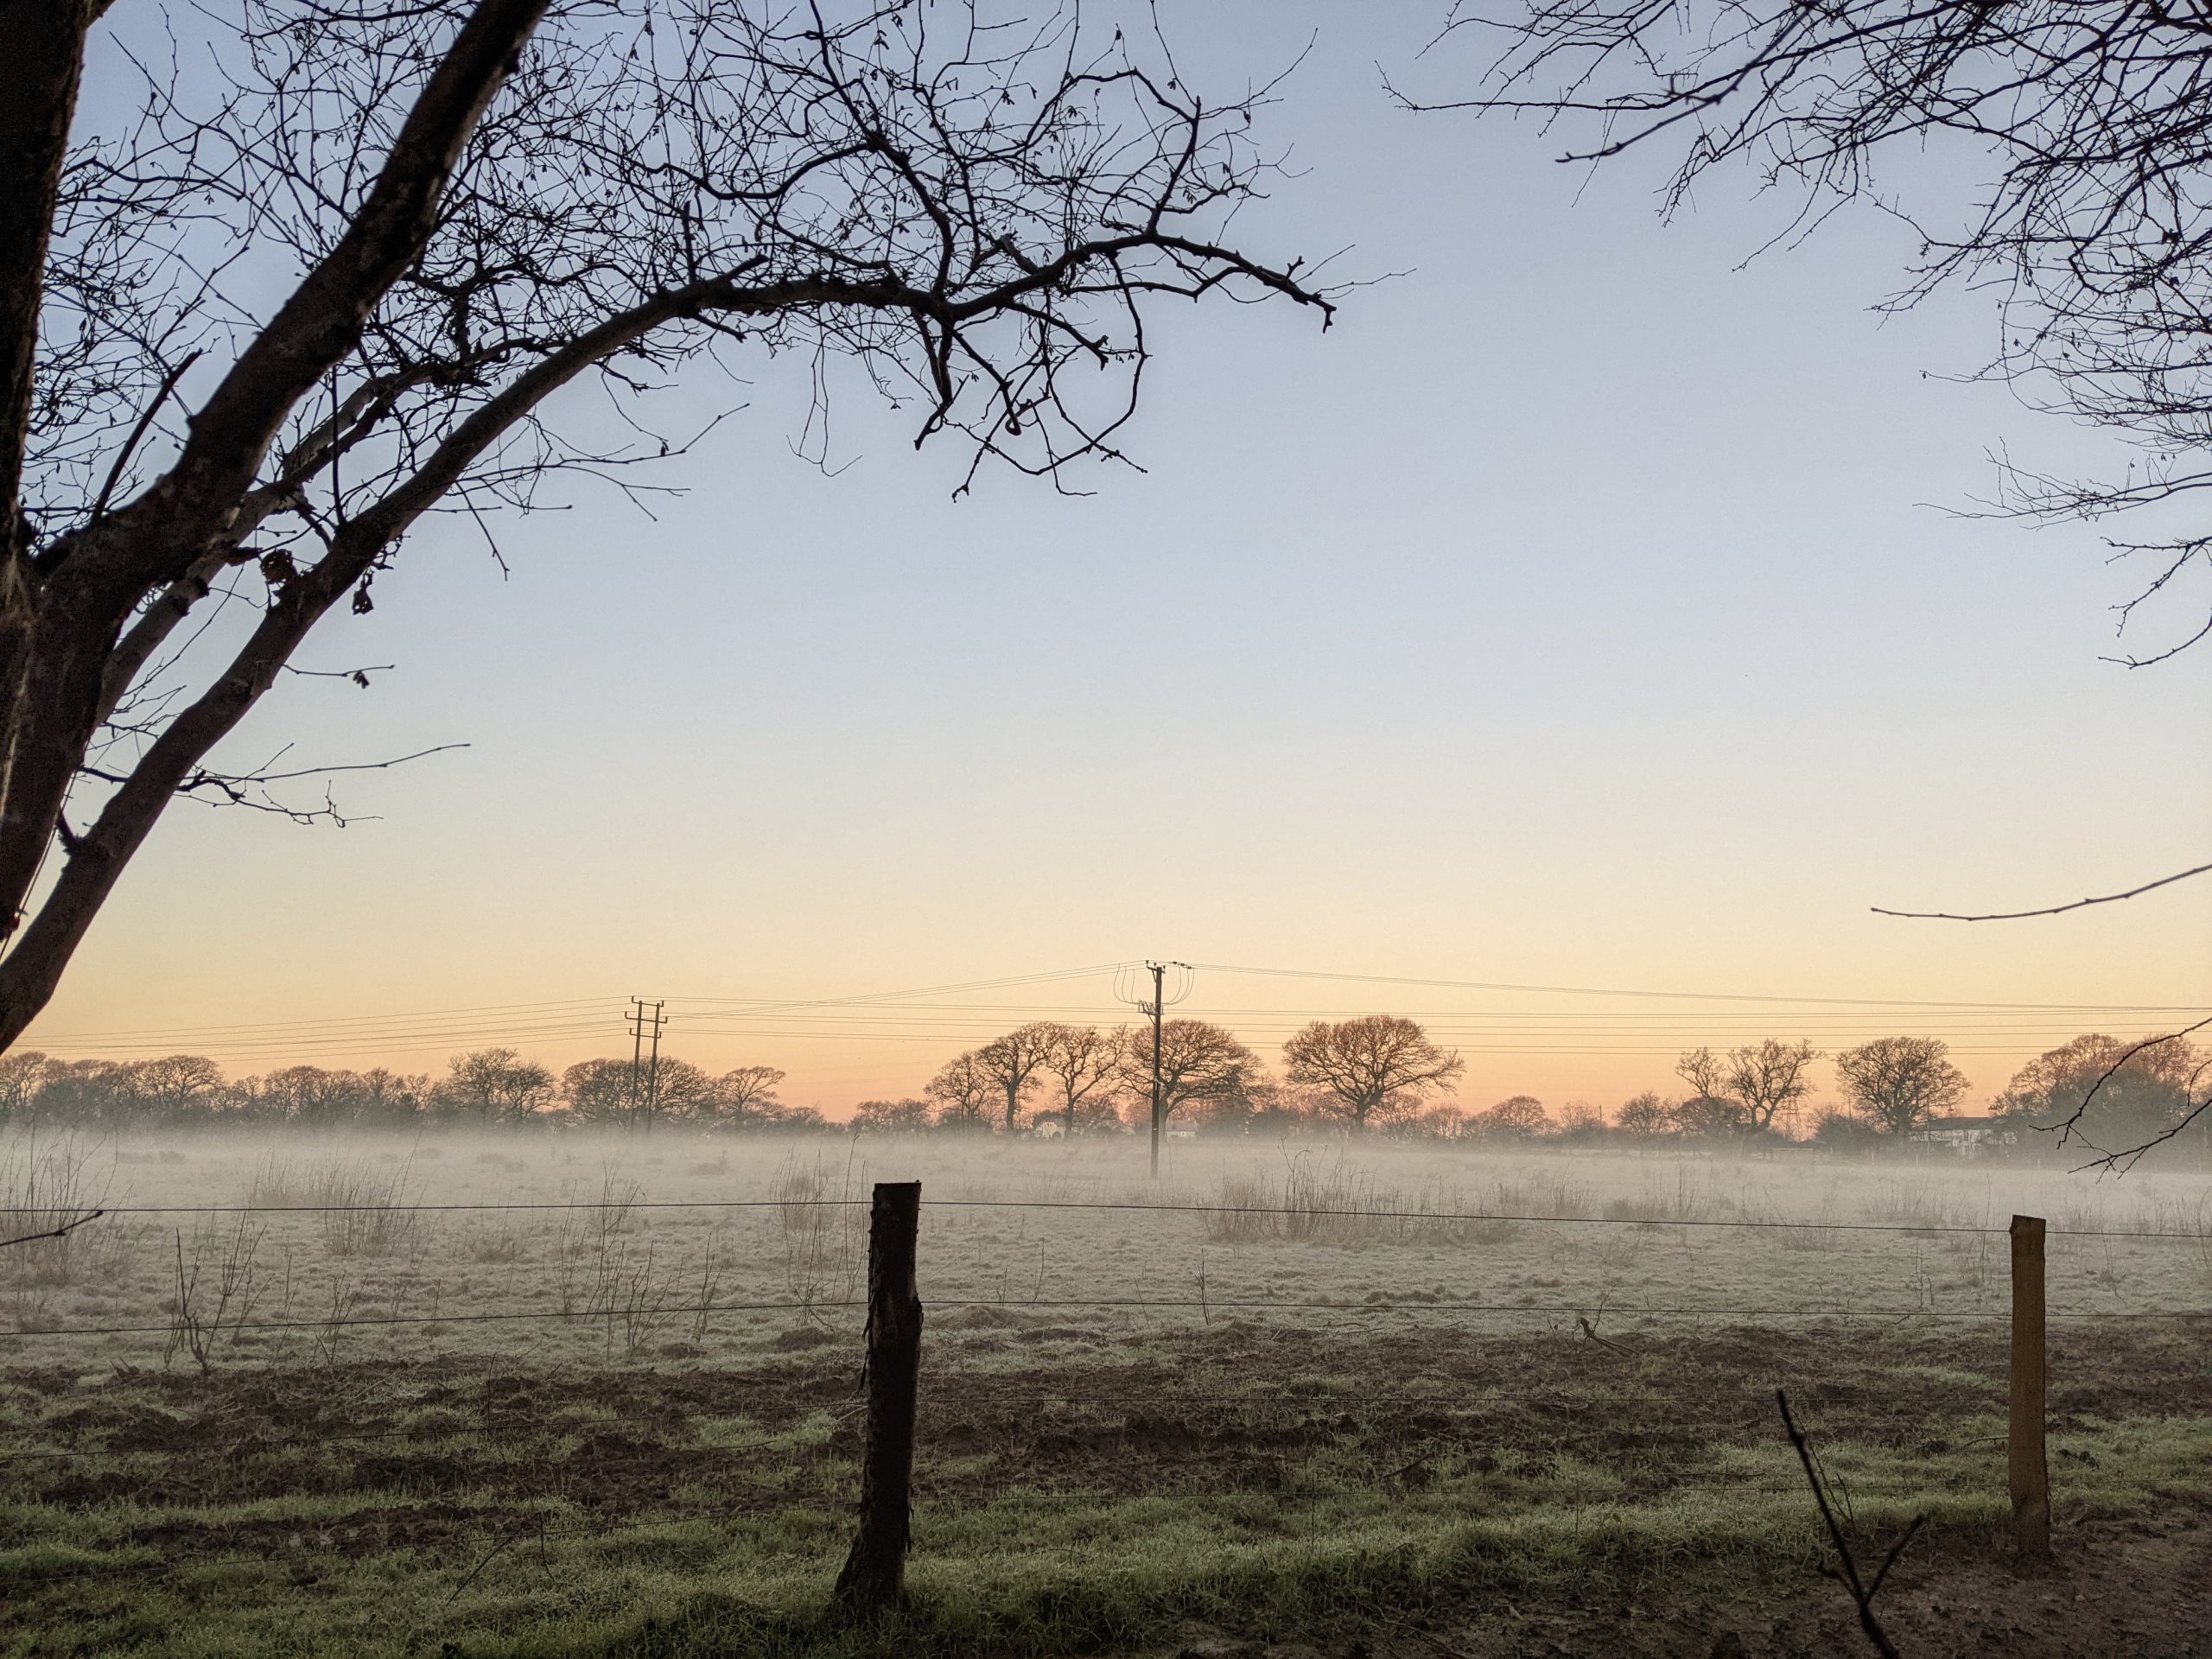 Sunrise over a misty field with fence in foreground